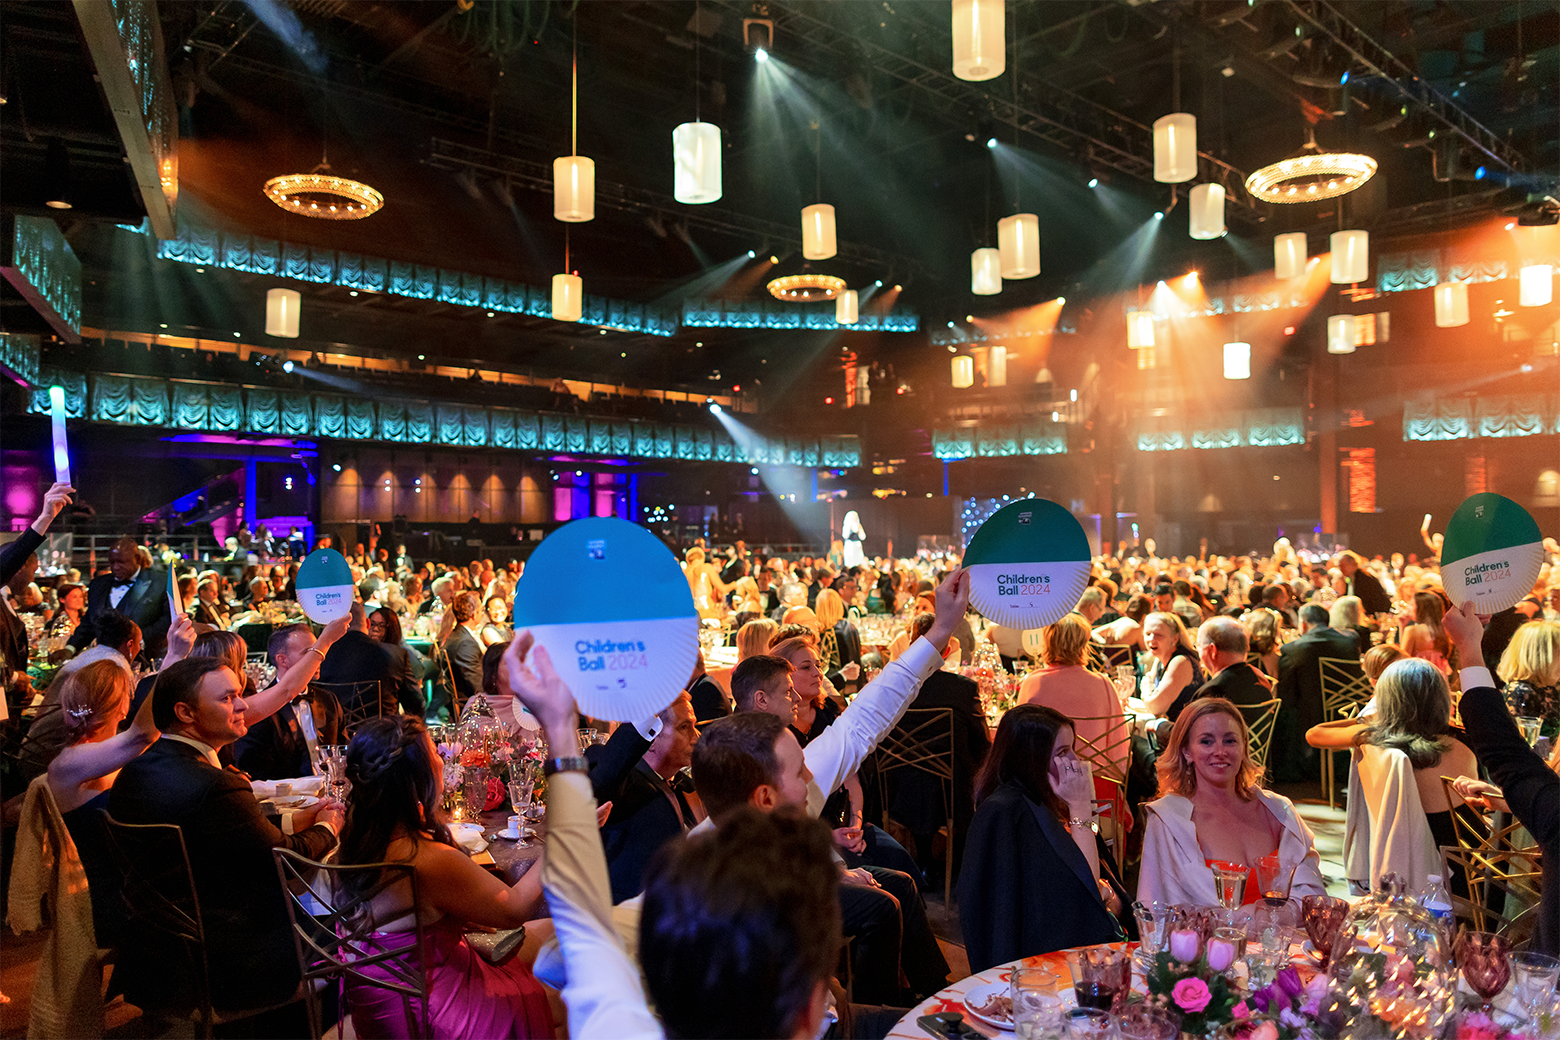 Children's ball guests holding up auction paddles.